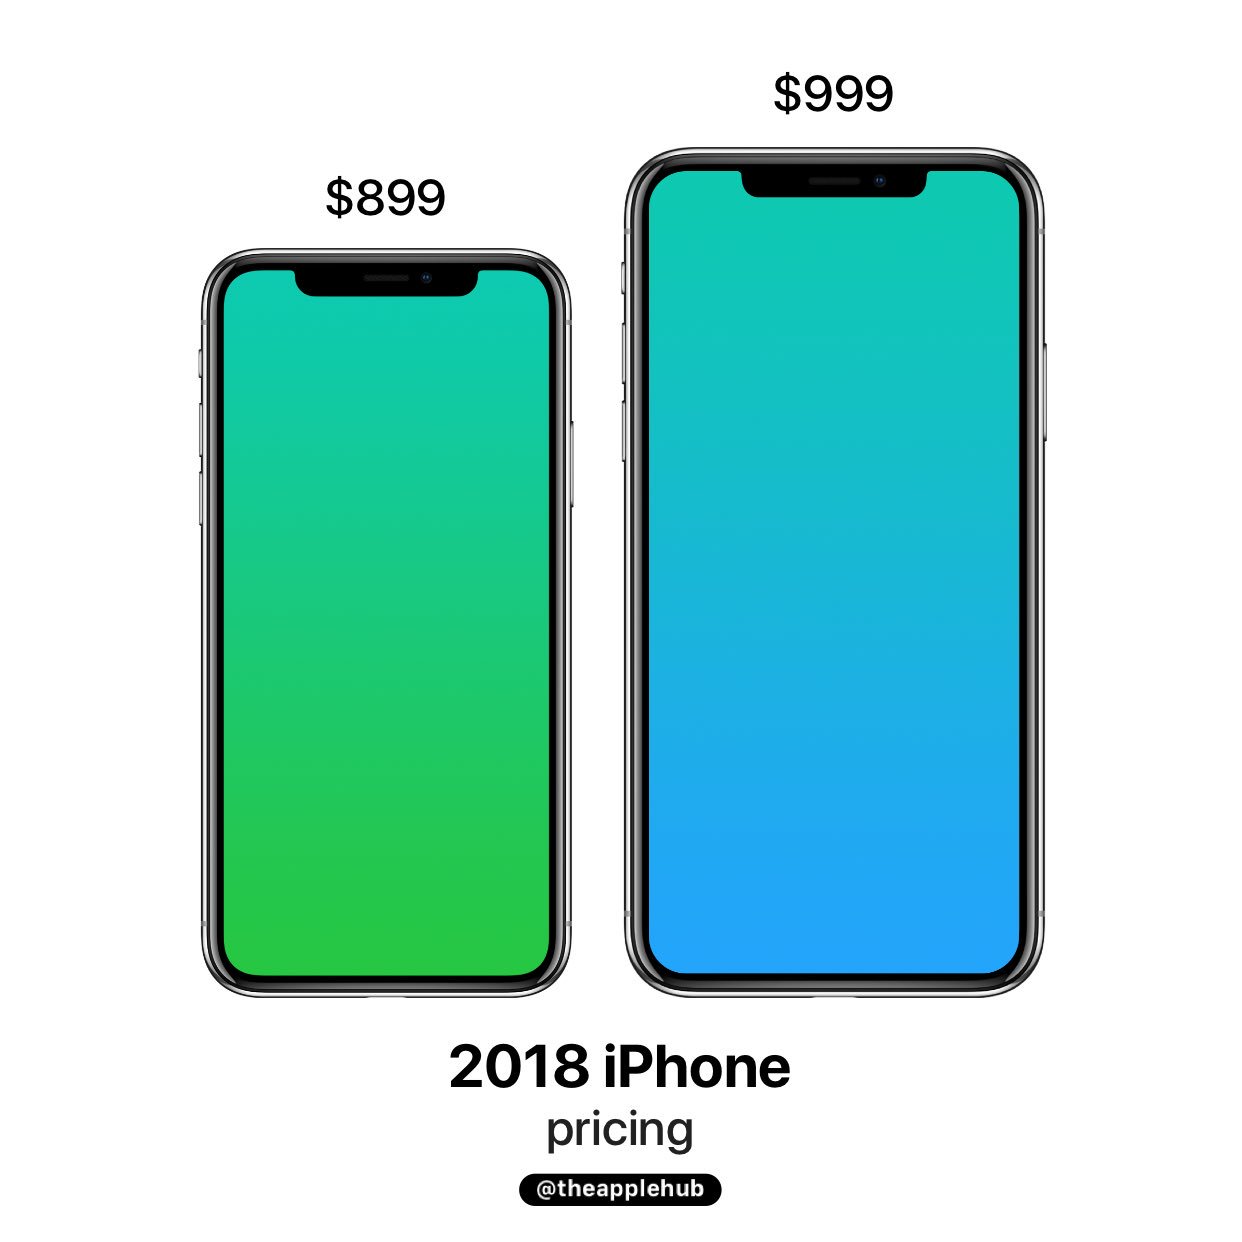 Iphone X Plus Will Cost 999 Refreshed Iphone X Priced At 899 Says Analyst - cost of iphone x 112400 robux 99850 999 which one would